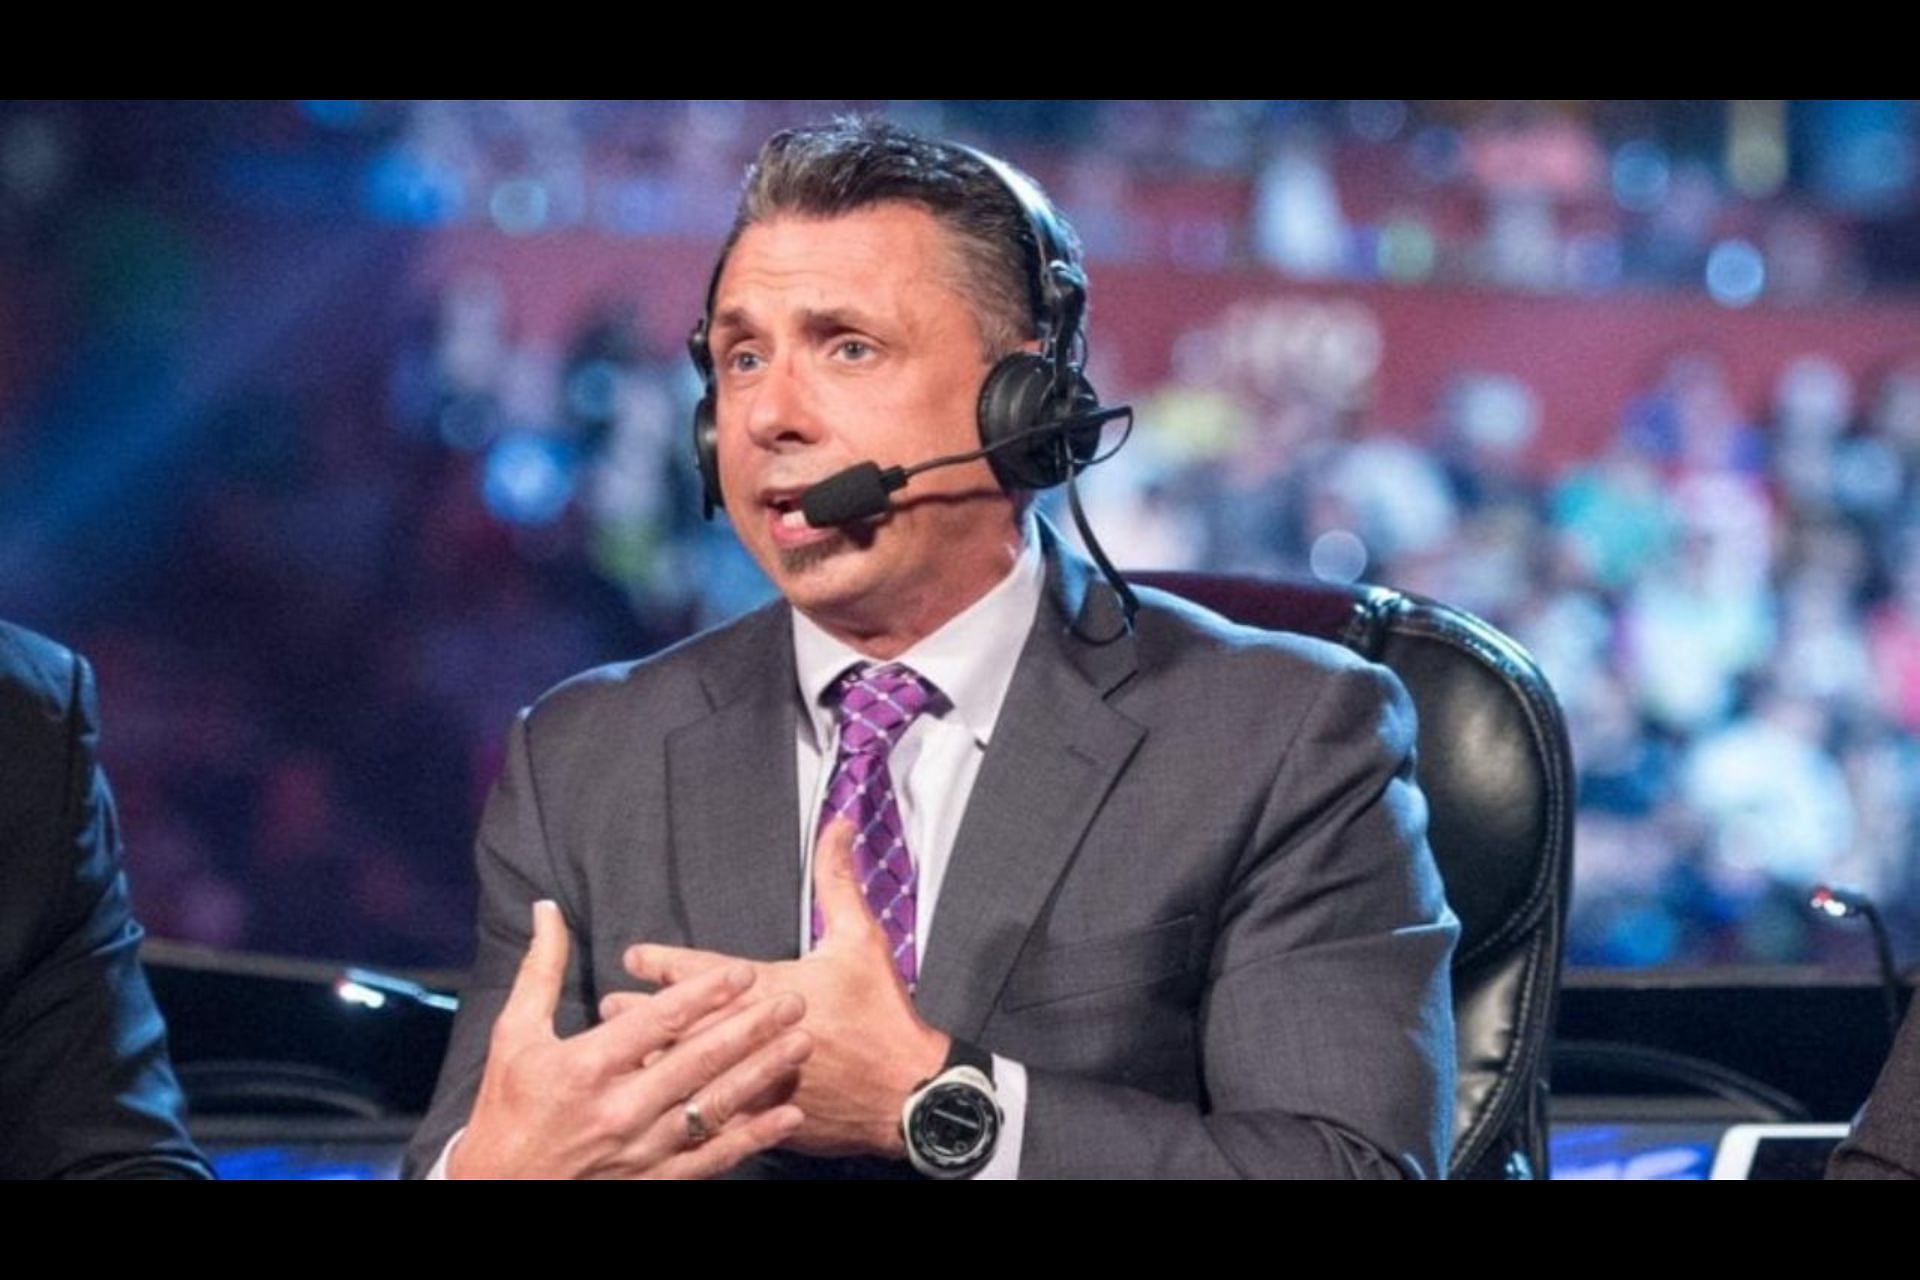 Michael Cole slips up on commentary again